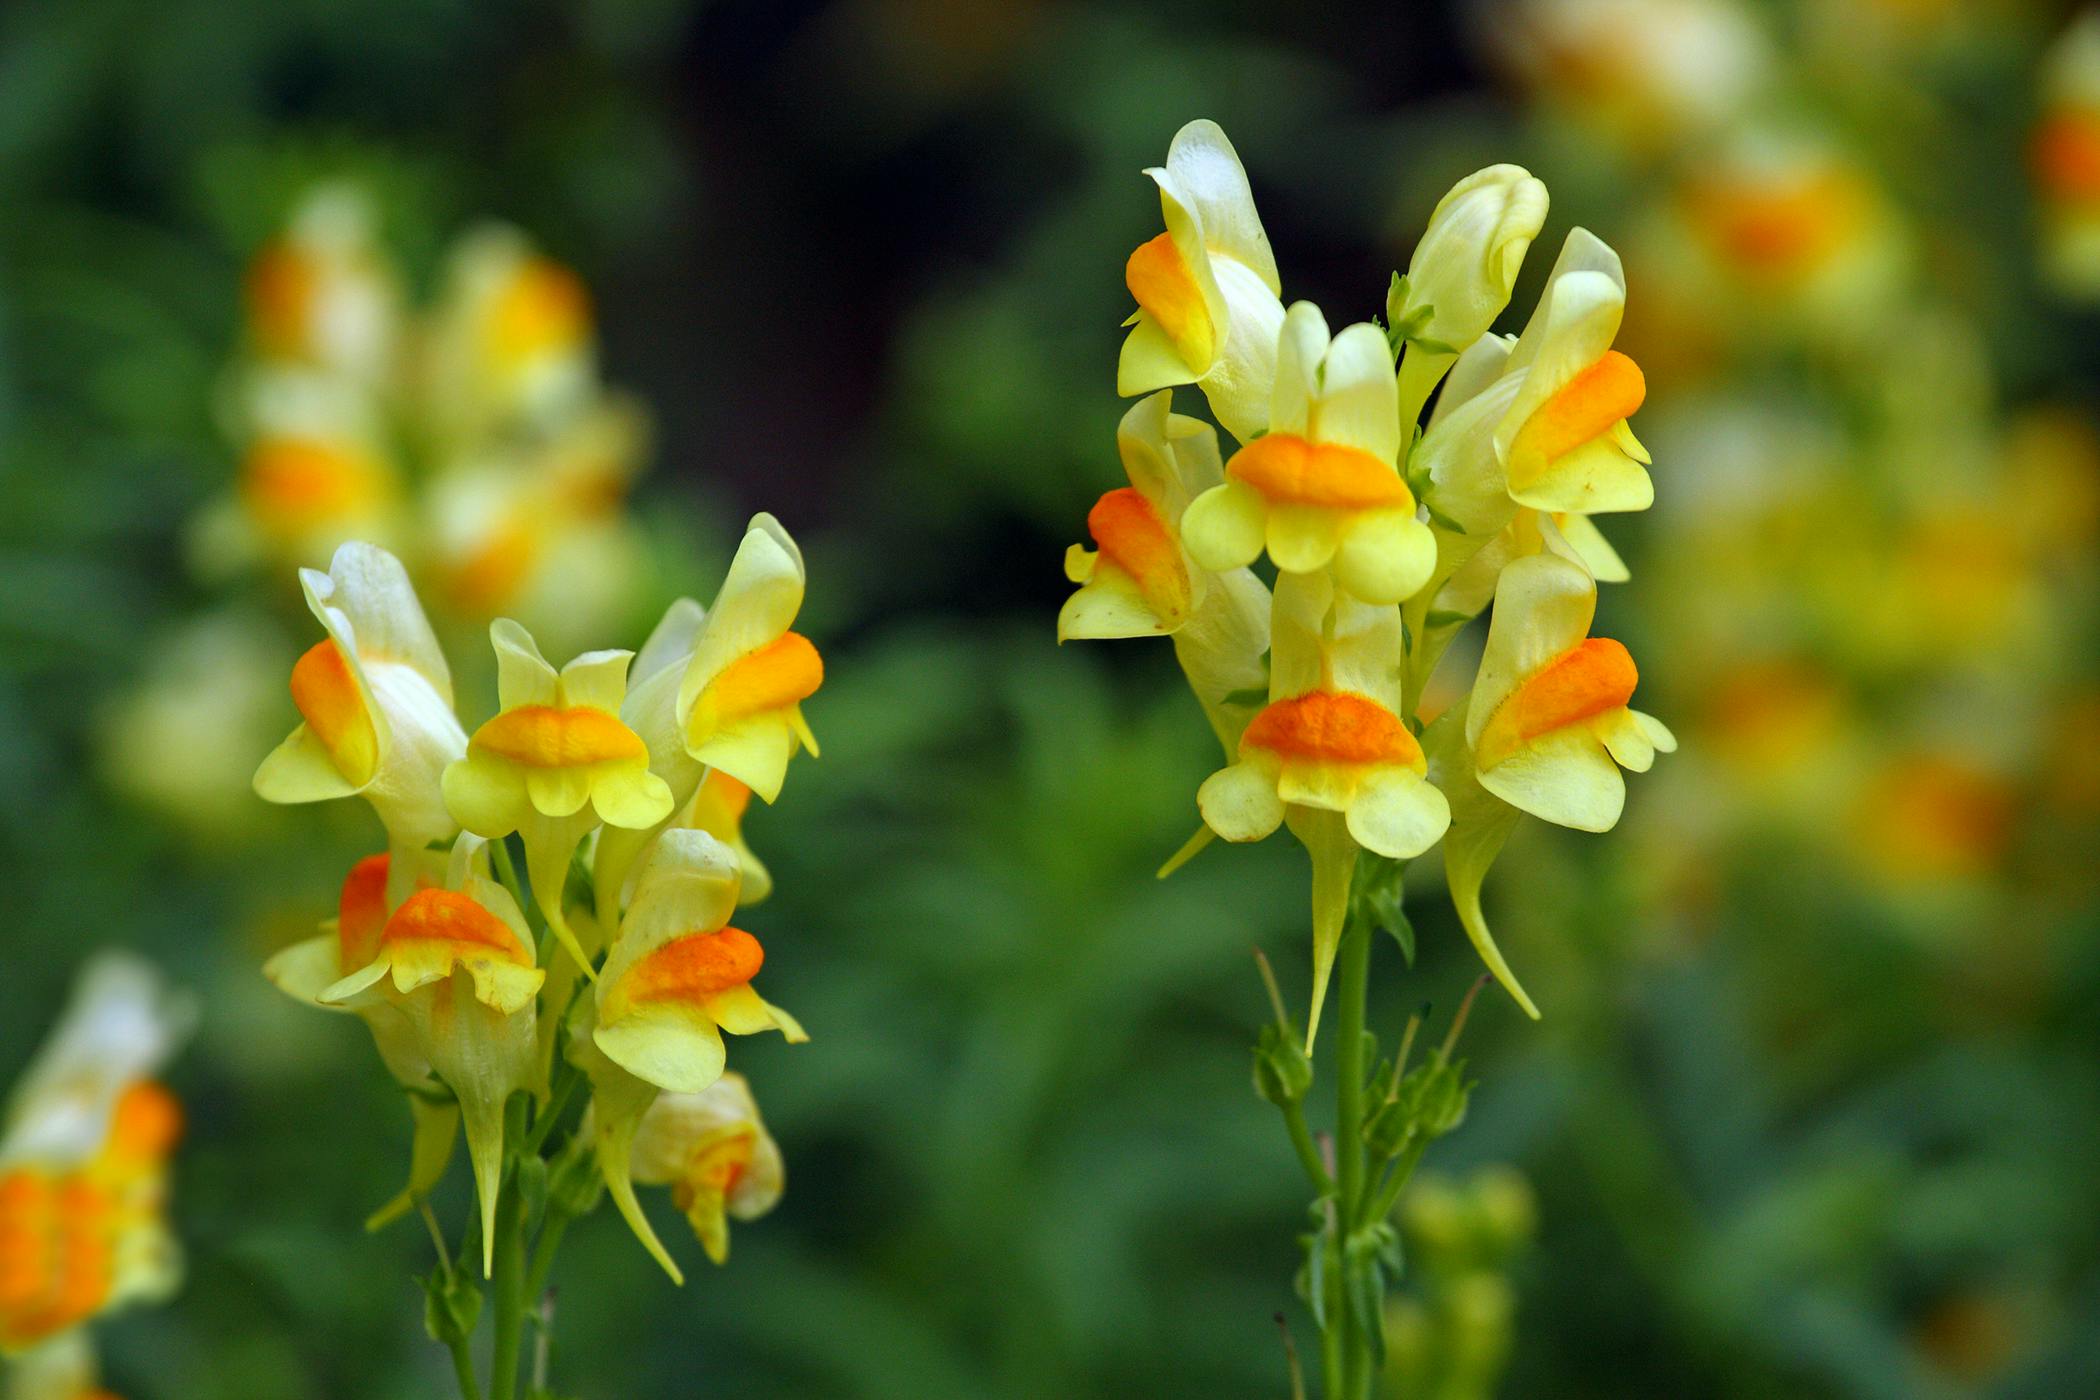 toadflax-poisoning.jpg